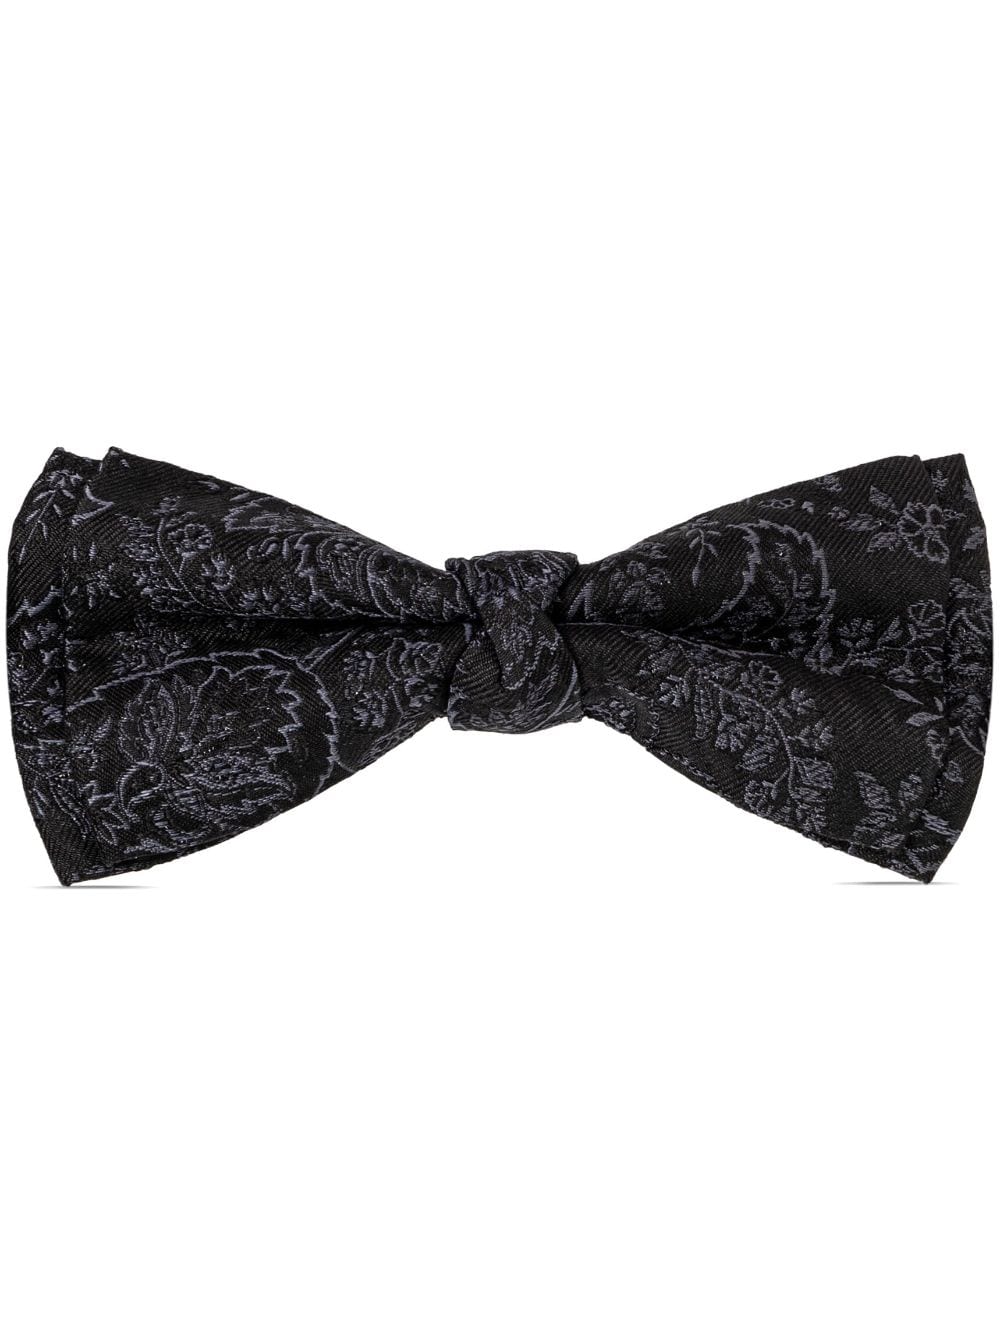 Etro Floral-jacquard Twill Bow Tie In Black